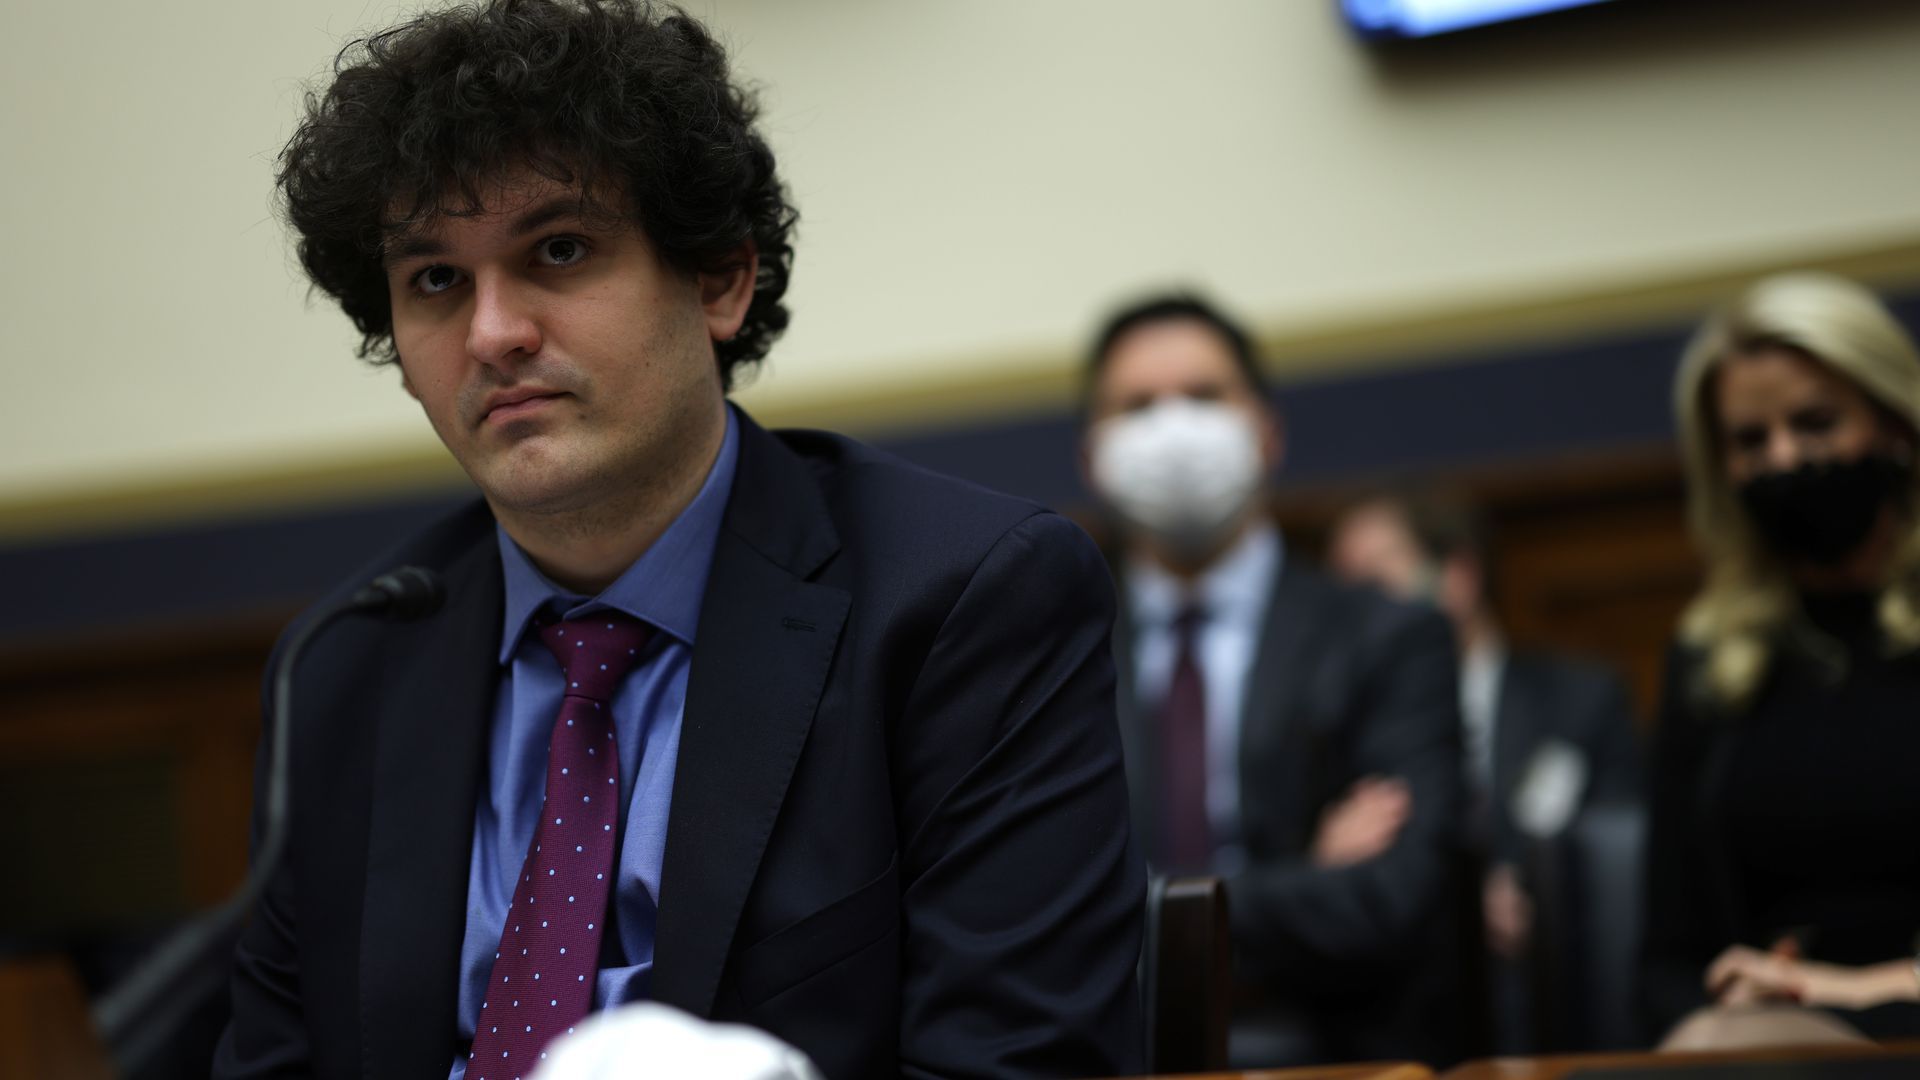 Sam Bankman-Fried testifies during a hearing before the House Financial Services Committee on Capitol Hill on Dec. 8, 2021,. in Washington, D.C. Photo: Alex Wong/Getty Images